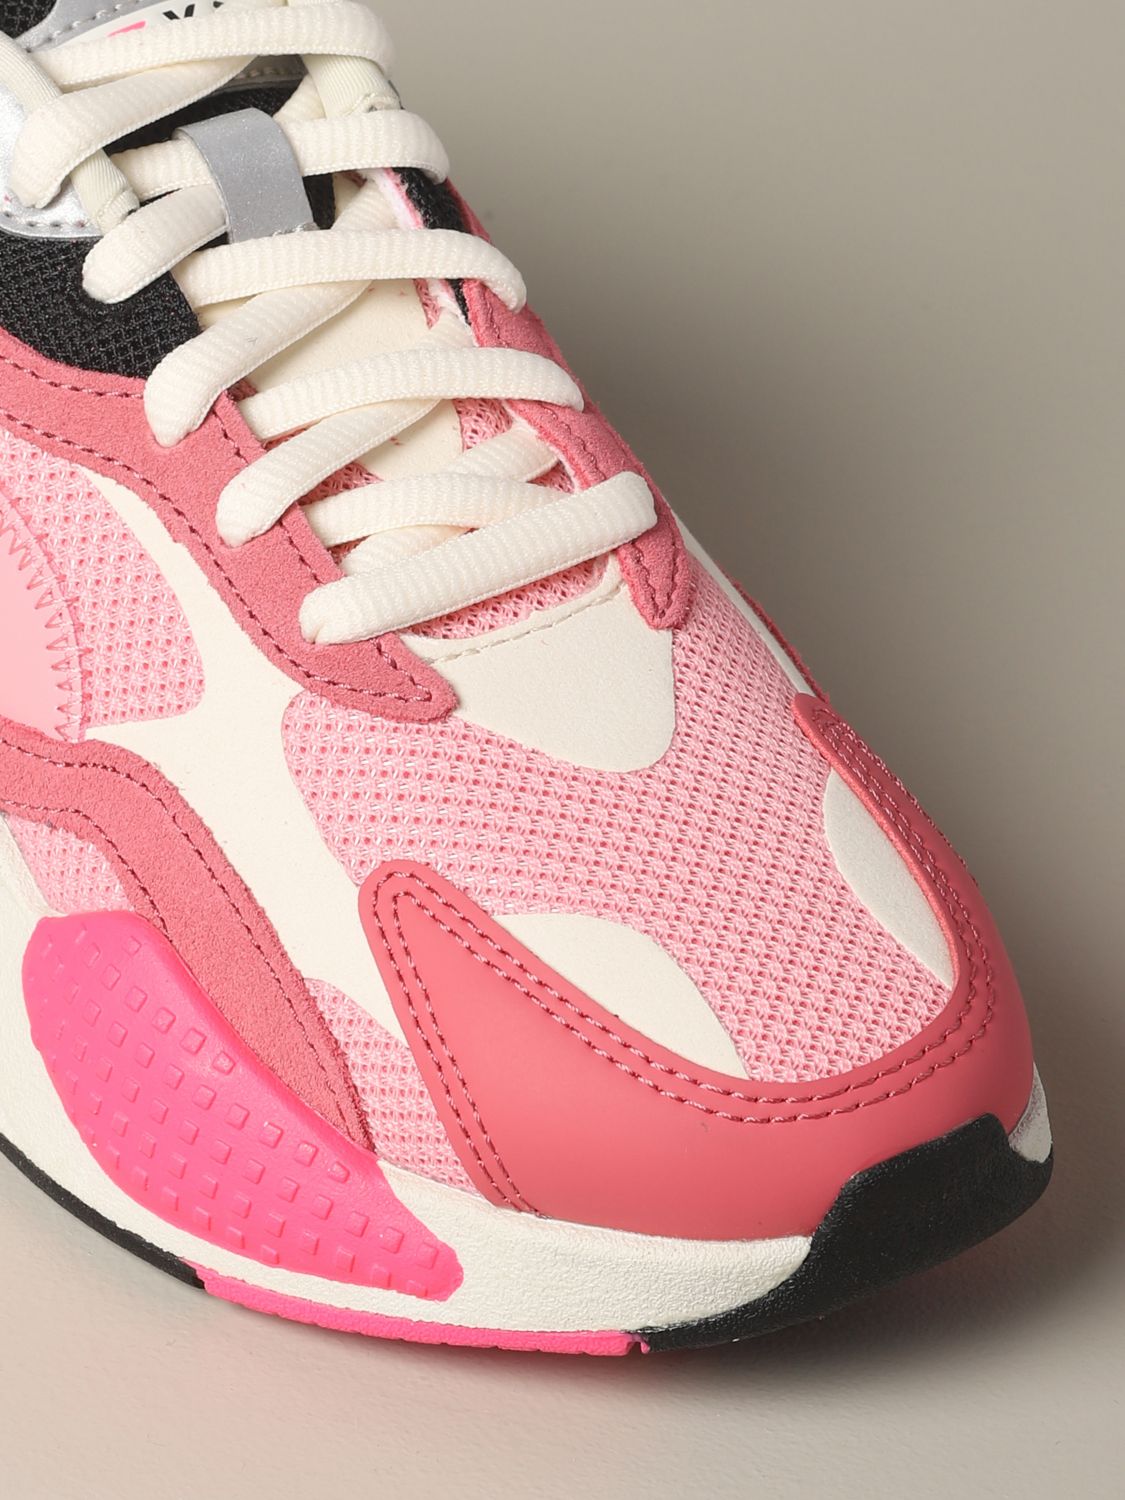 Puma Outlet: Shoes women | Sneakers 